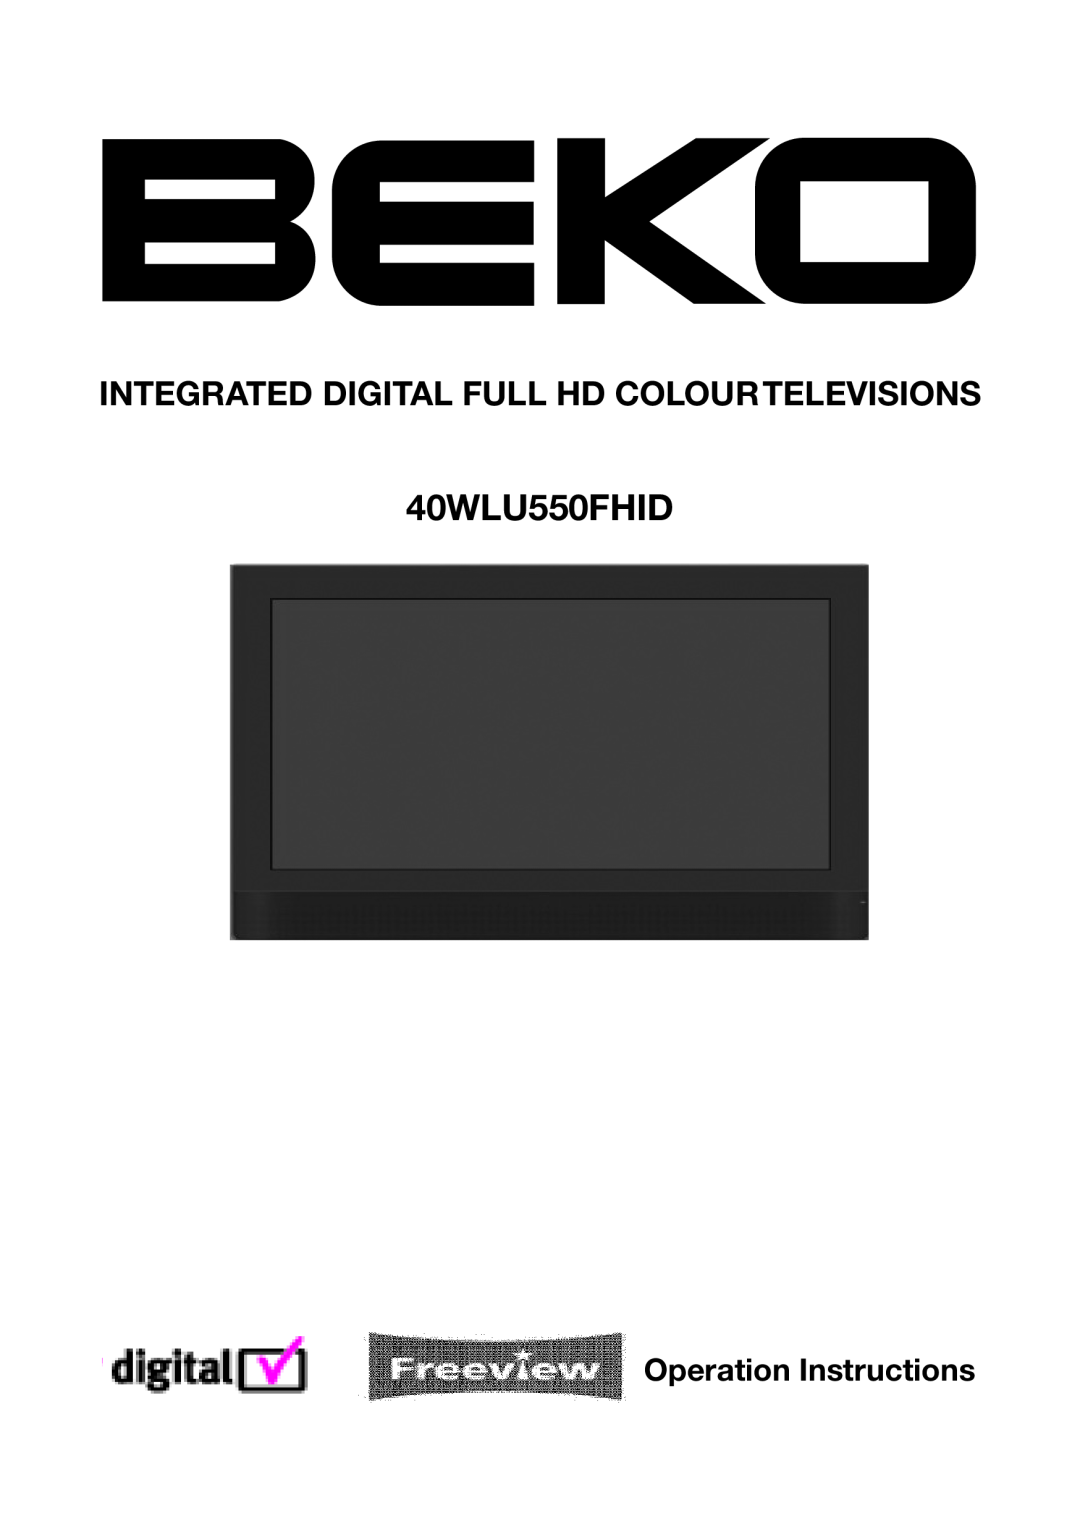 Beko 40WLU550FHID manual Operation Instructions, Integrated Digital Full Hd Colourtelevisions 